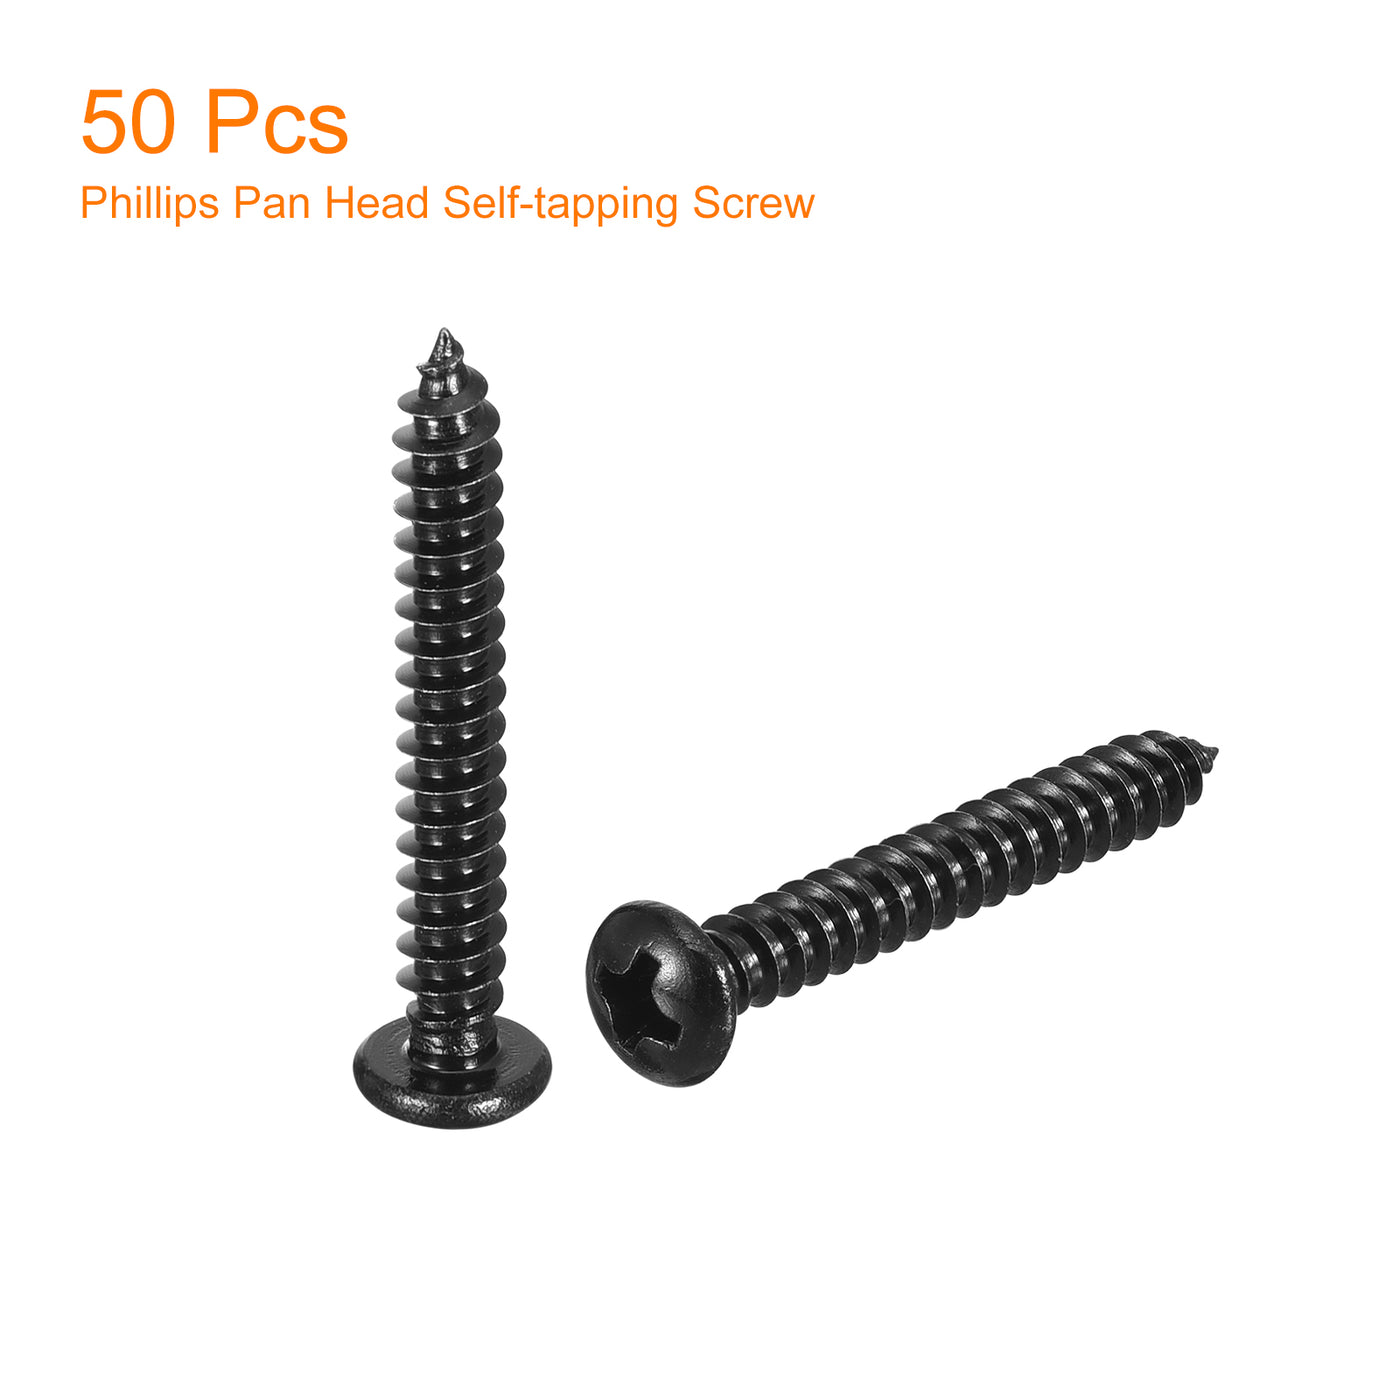 uxcell Uxcell #8 x 1-3/16" Phillips Pan Head Self-tapping Screw, 50pcs - 304 Stainless Steel Round Head Wood Screw Full Thread (Black)